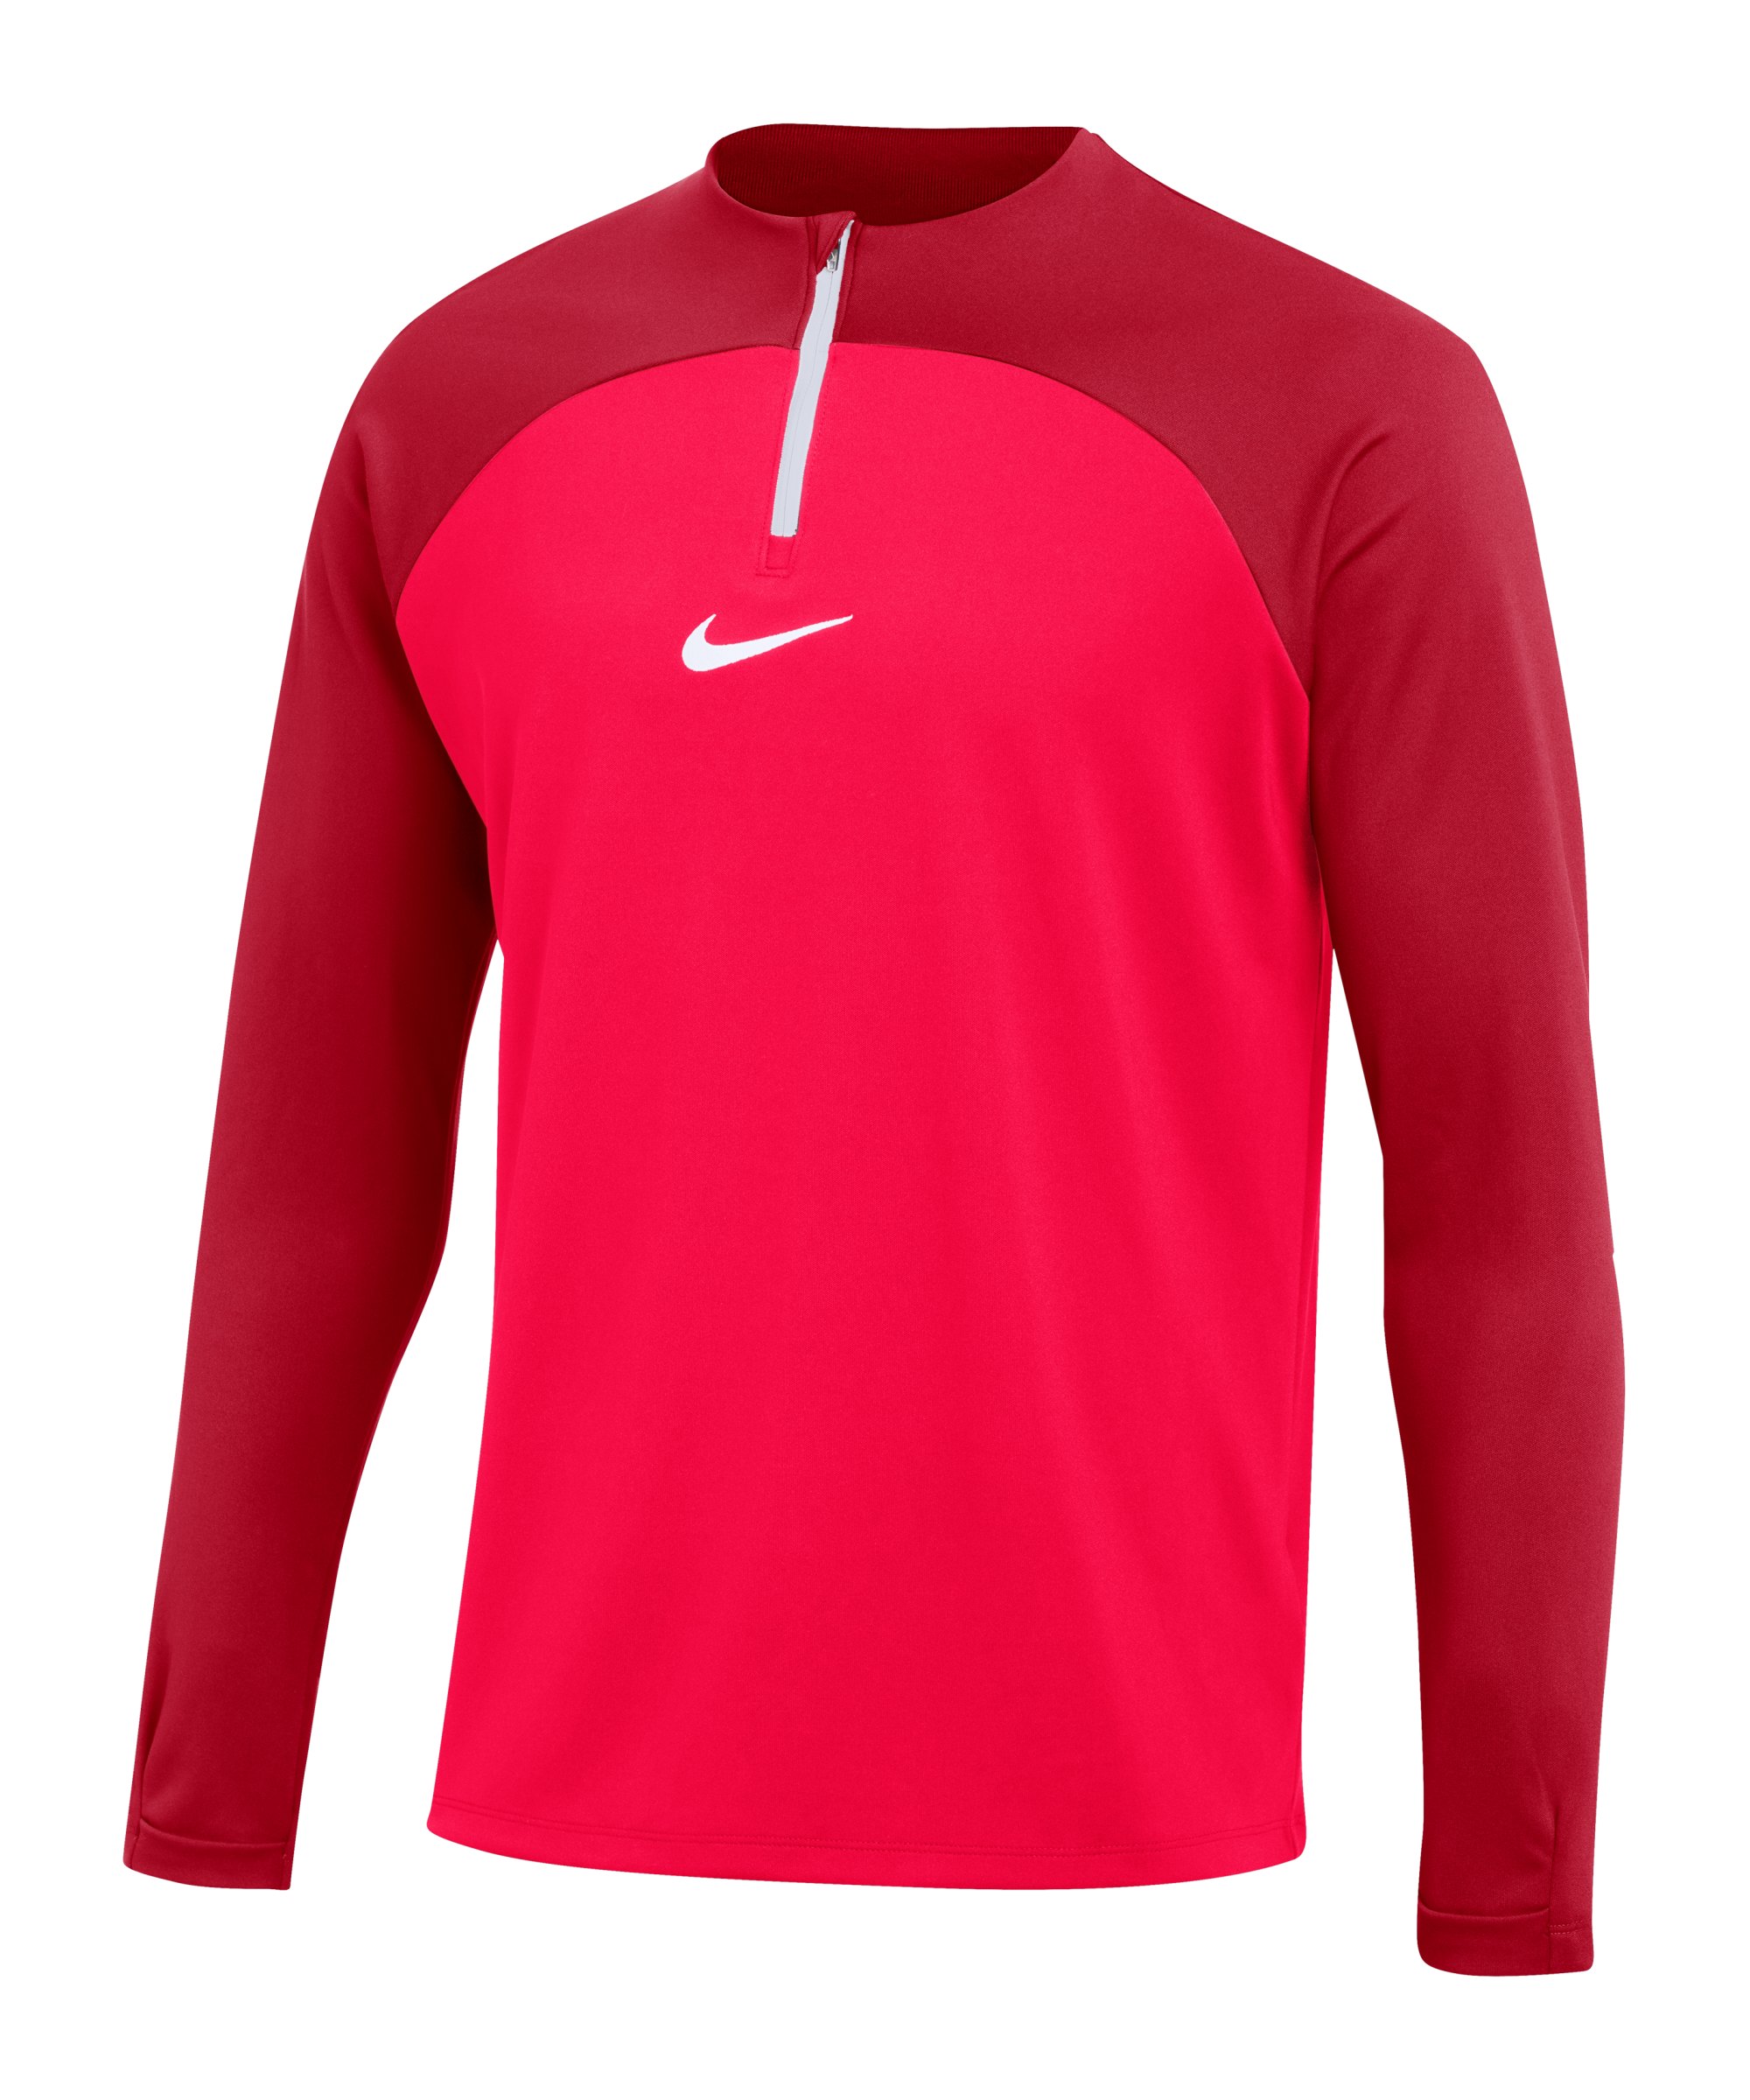 Nike Academy Pro Drill Top Kids Rot F635 - rot